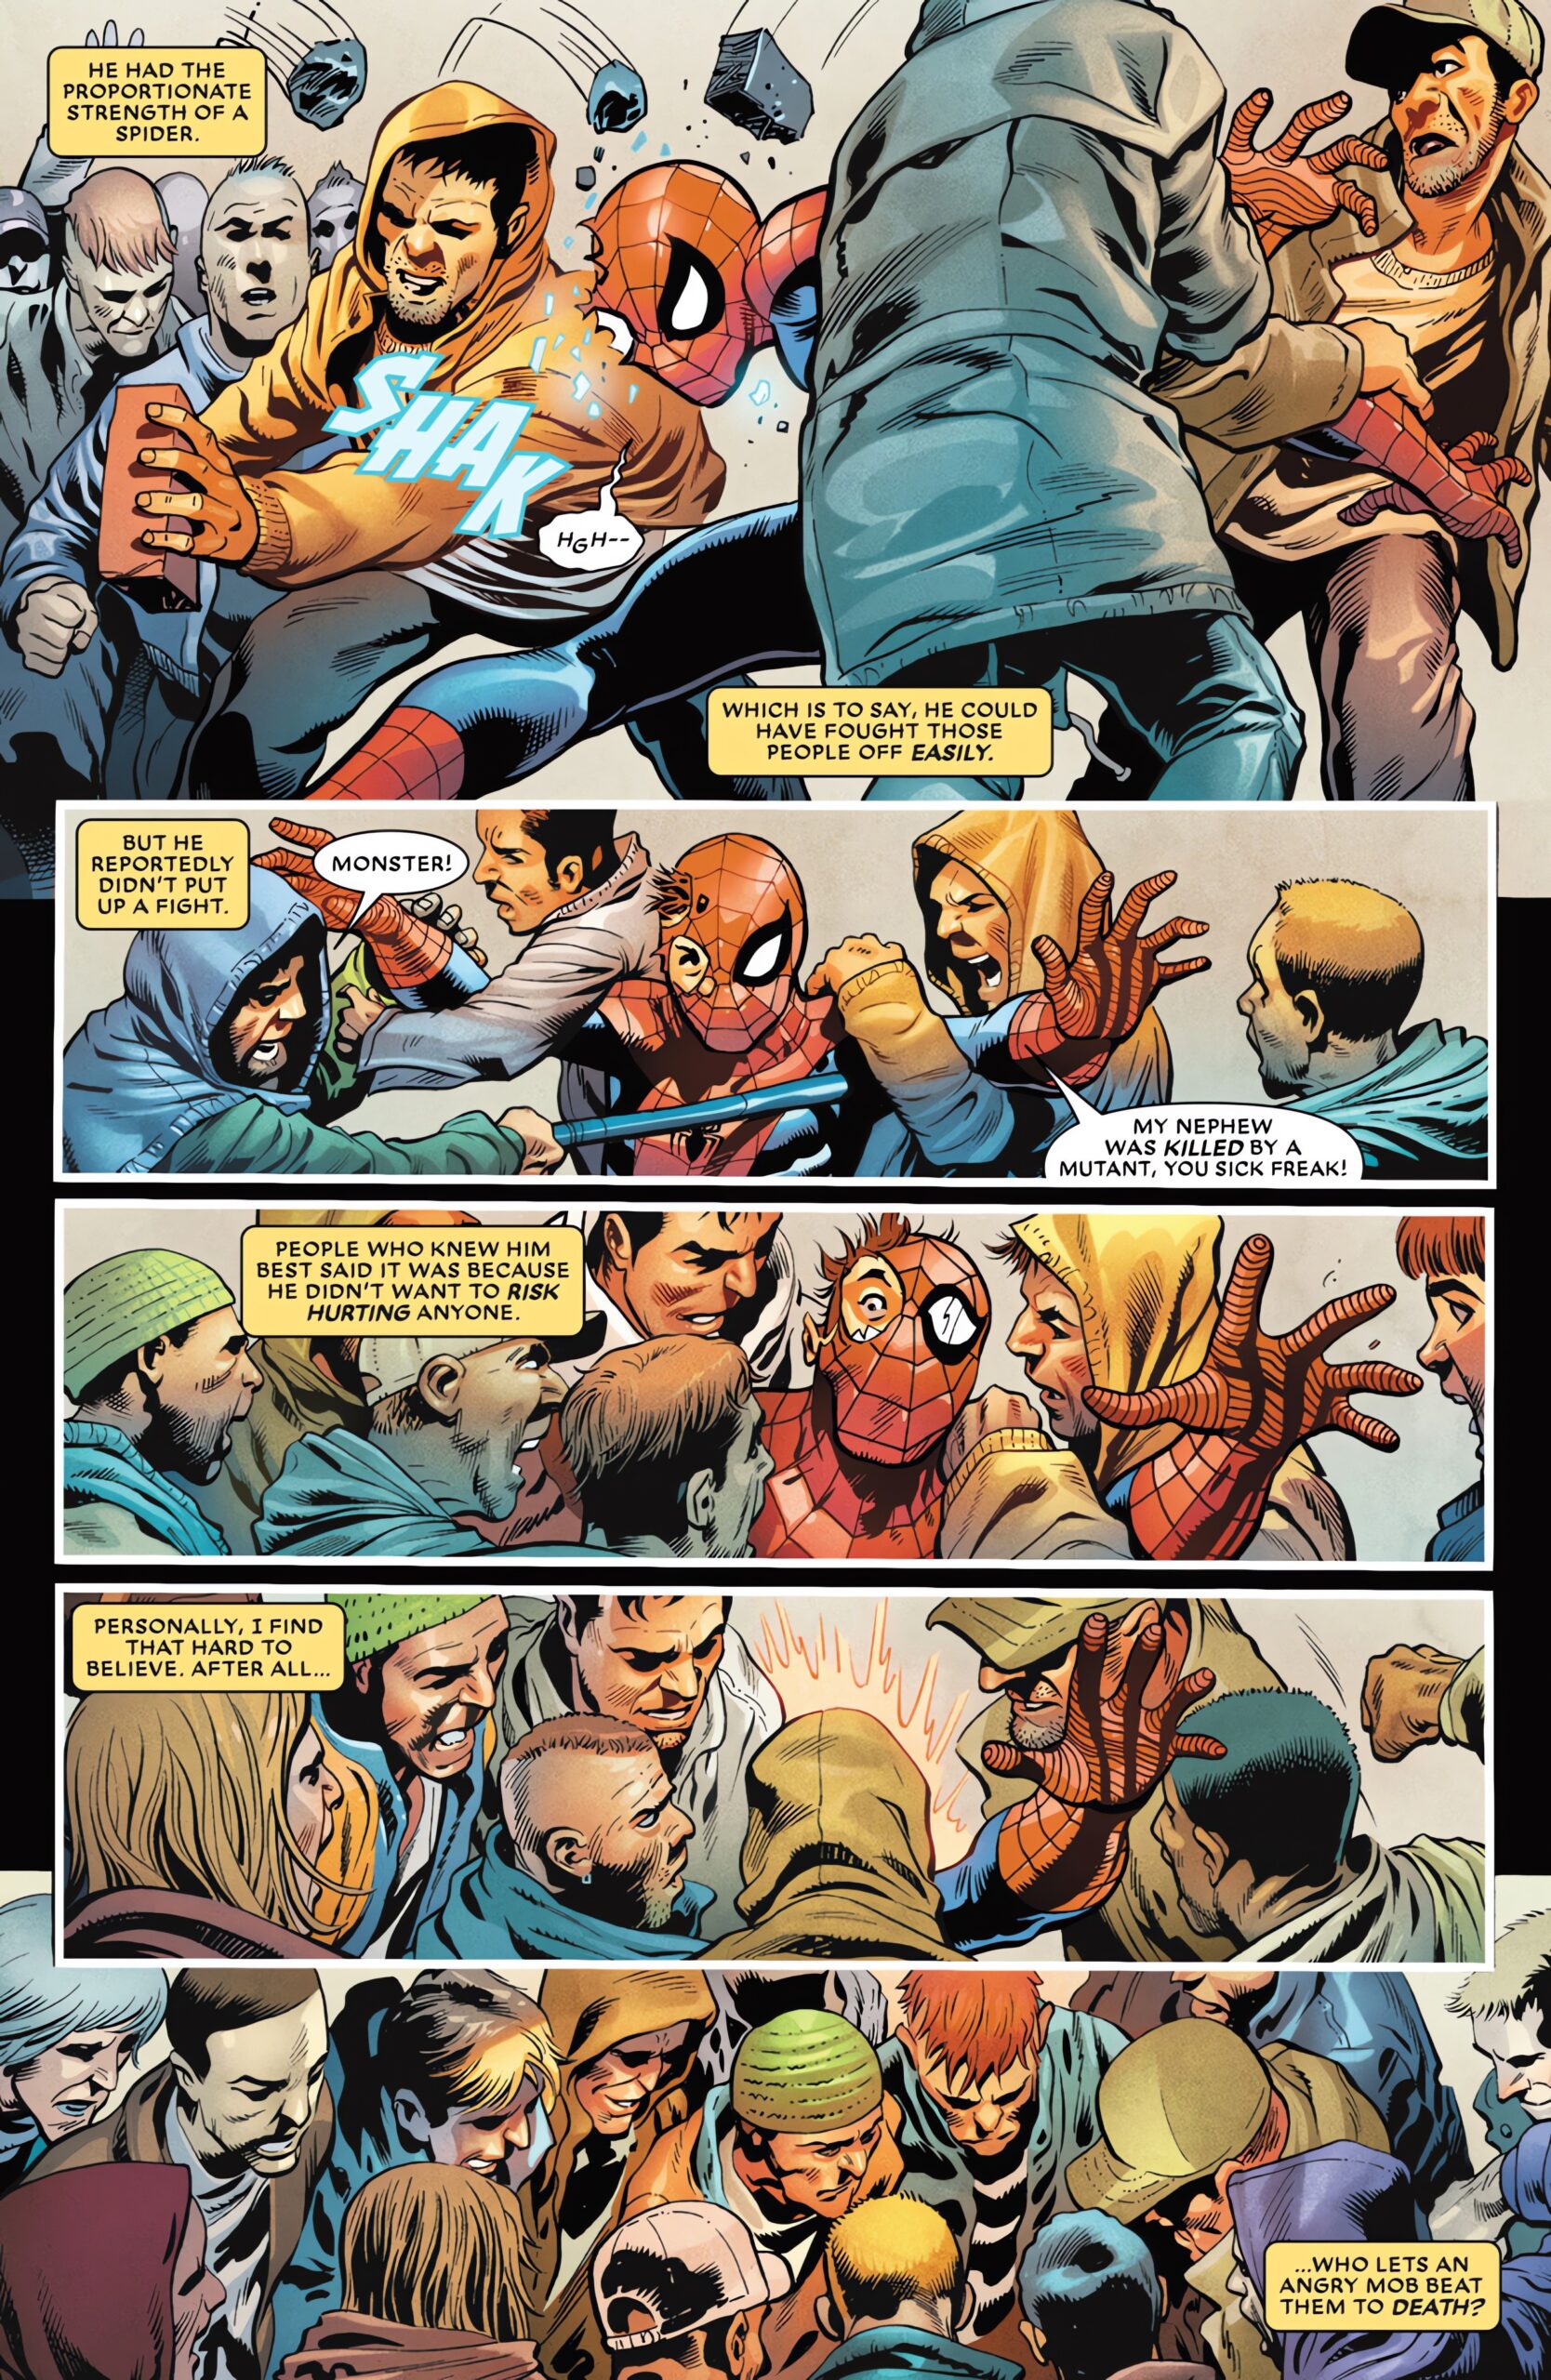 Marvel continues to prove it hates Spider-Man in X-Men: Days of Future Past - Doomsday Vol. 1 #1 (2023), Marvel Comics. Words by Marc Guggenheim, art by Manuel Garcia, Cam Smith, Yen Nitro, and Clayton Cowles.